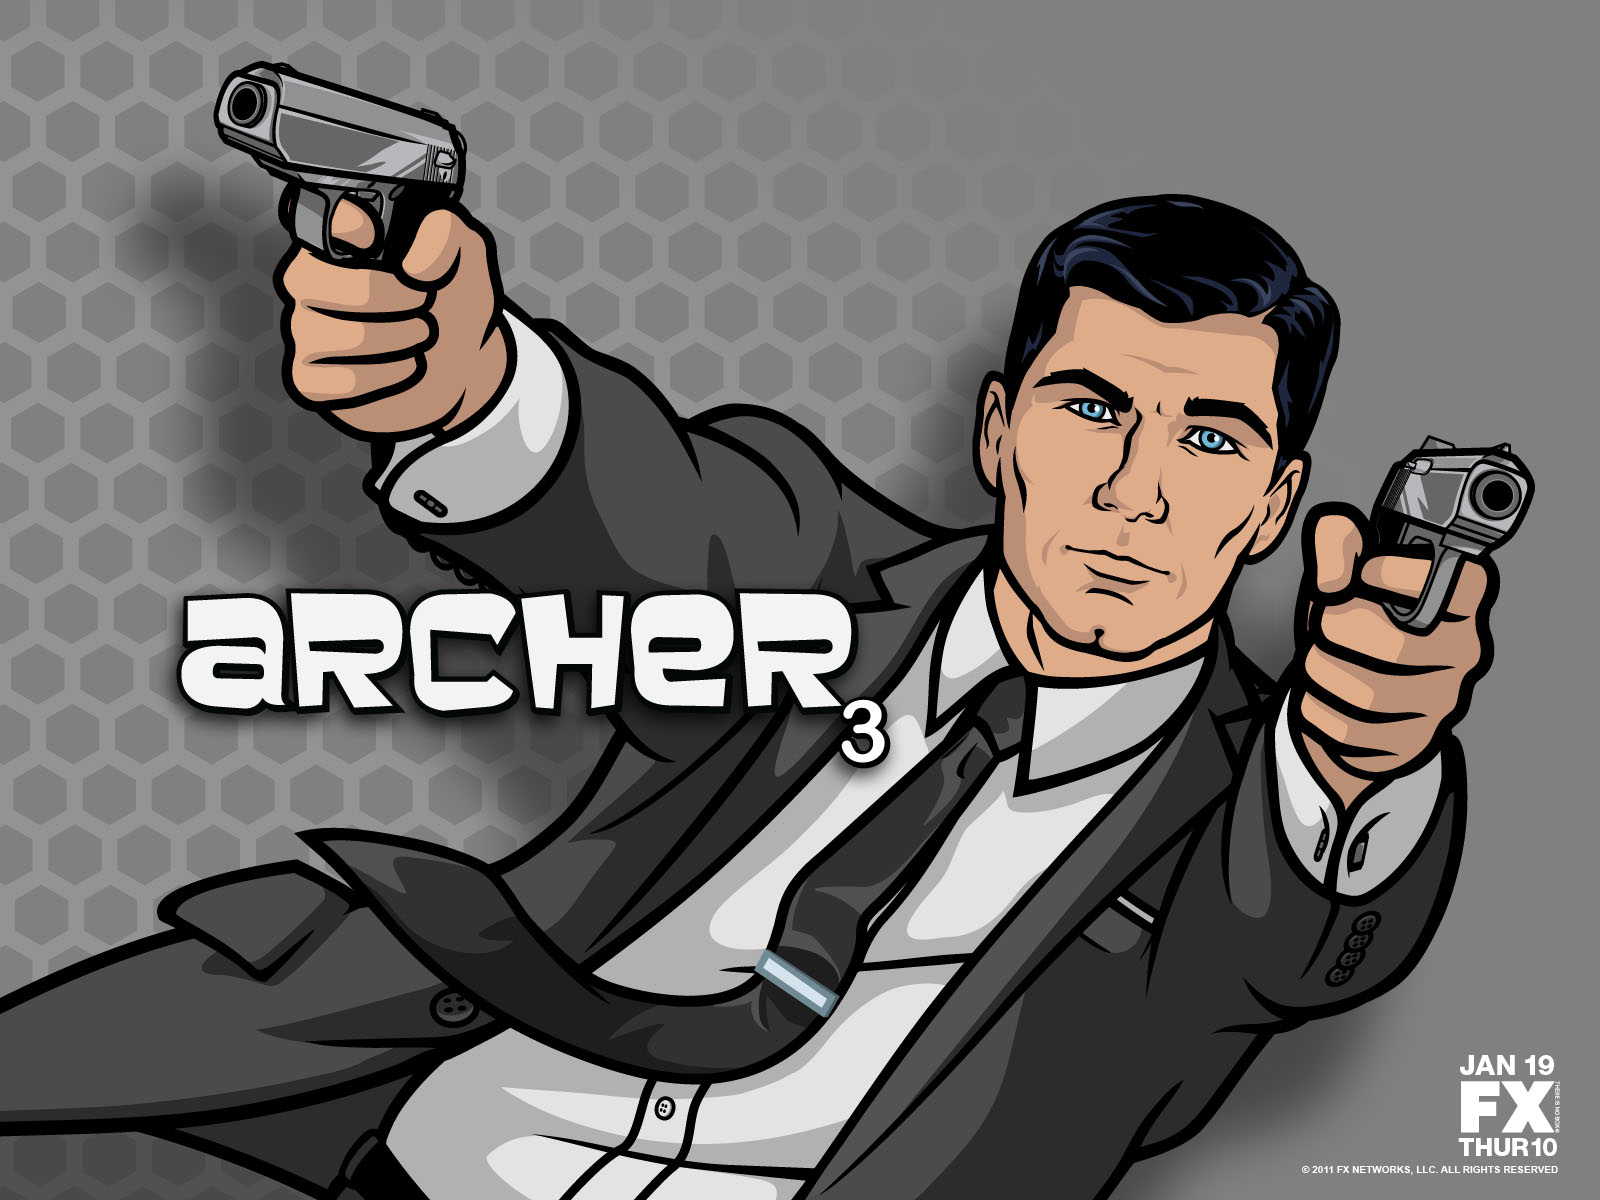 Archer Season 2 Available Now on Blu-ray and DVD